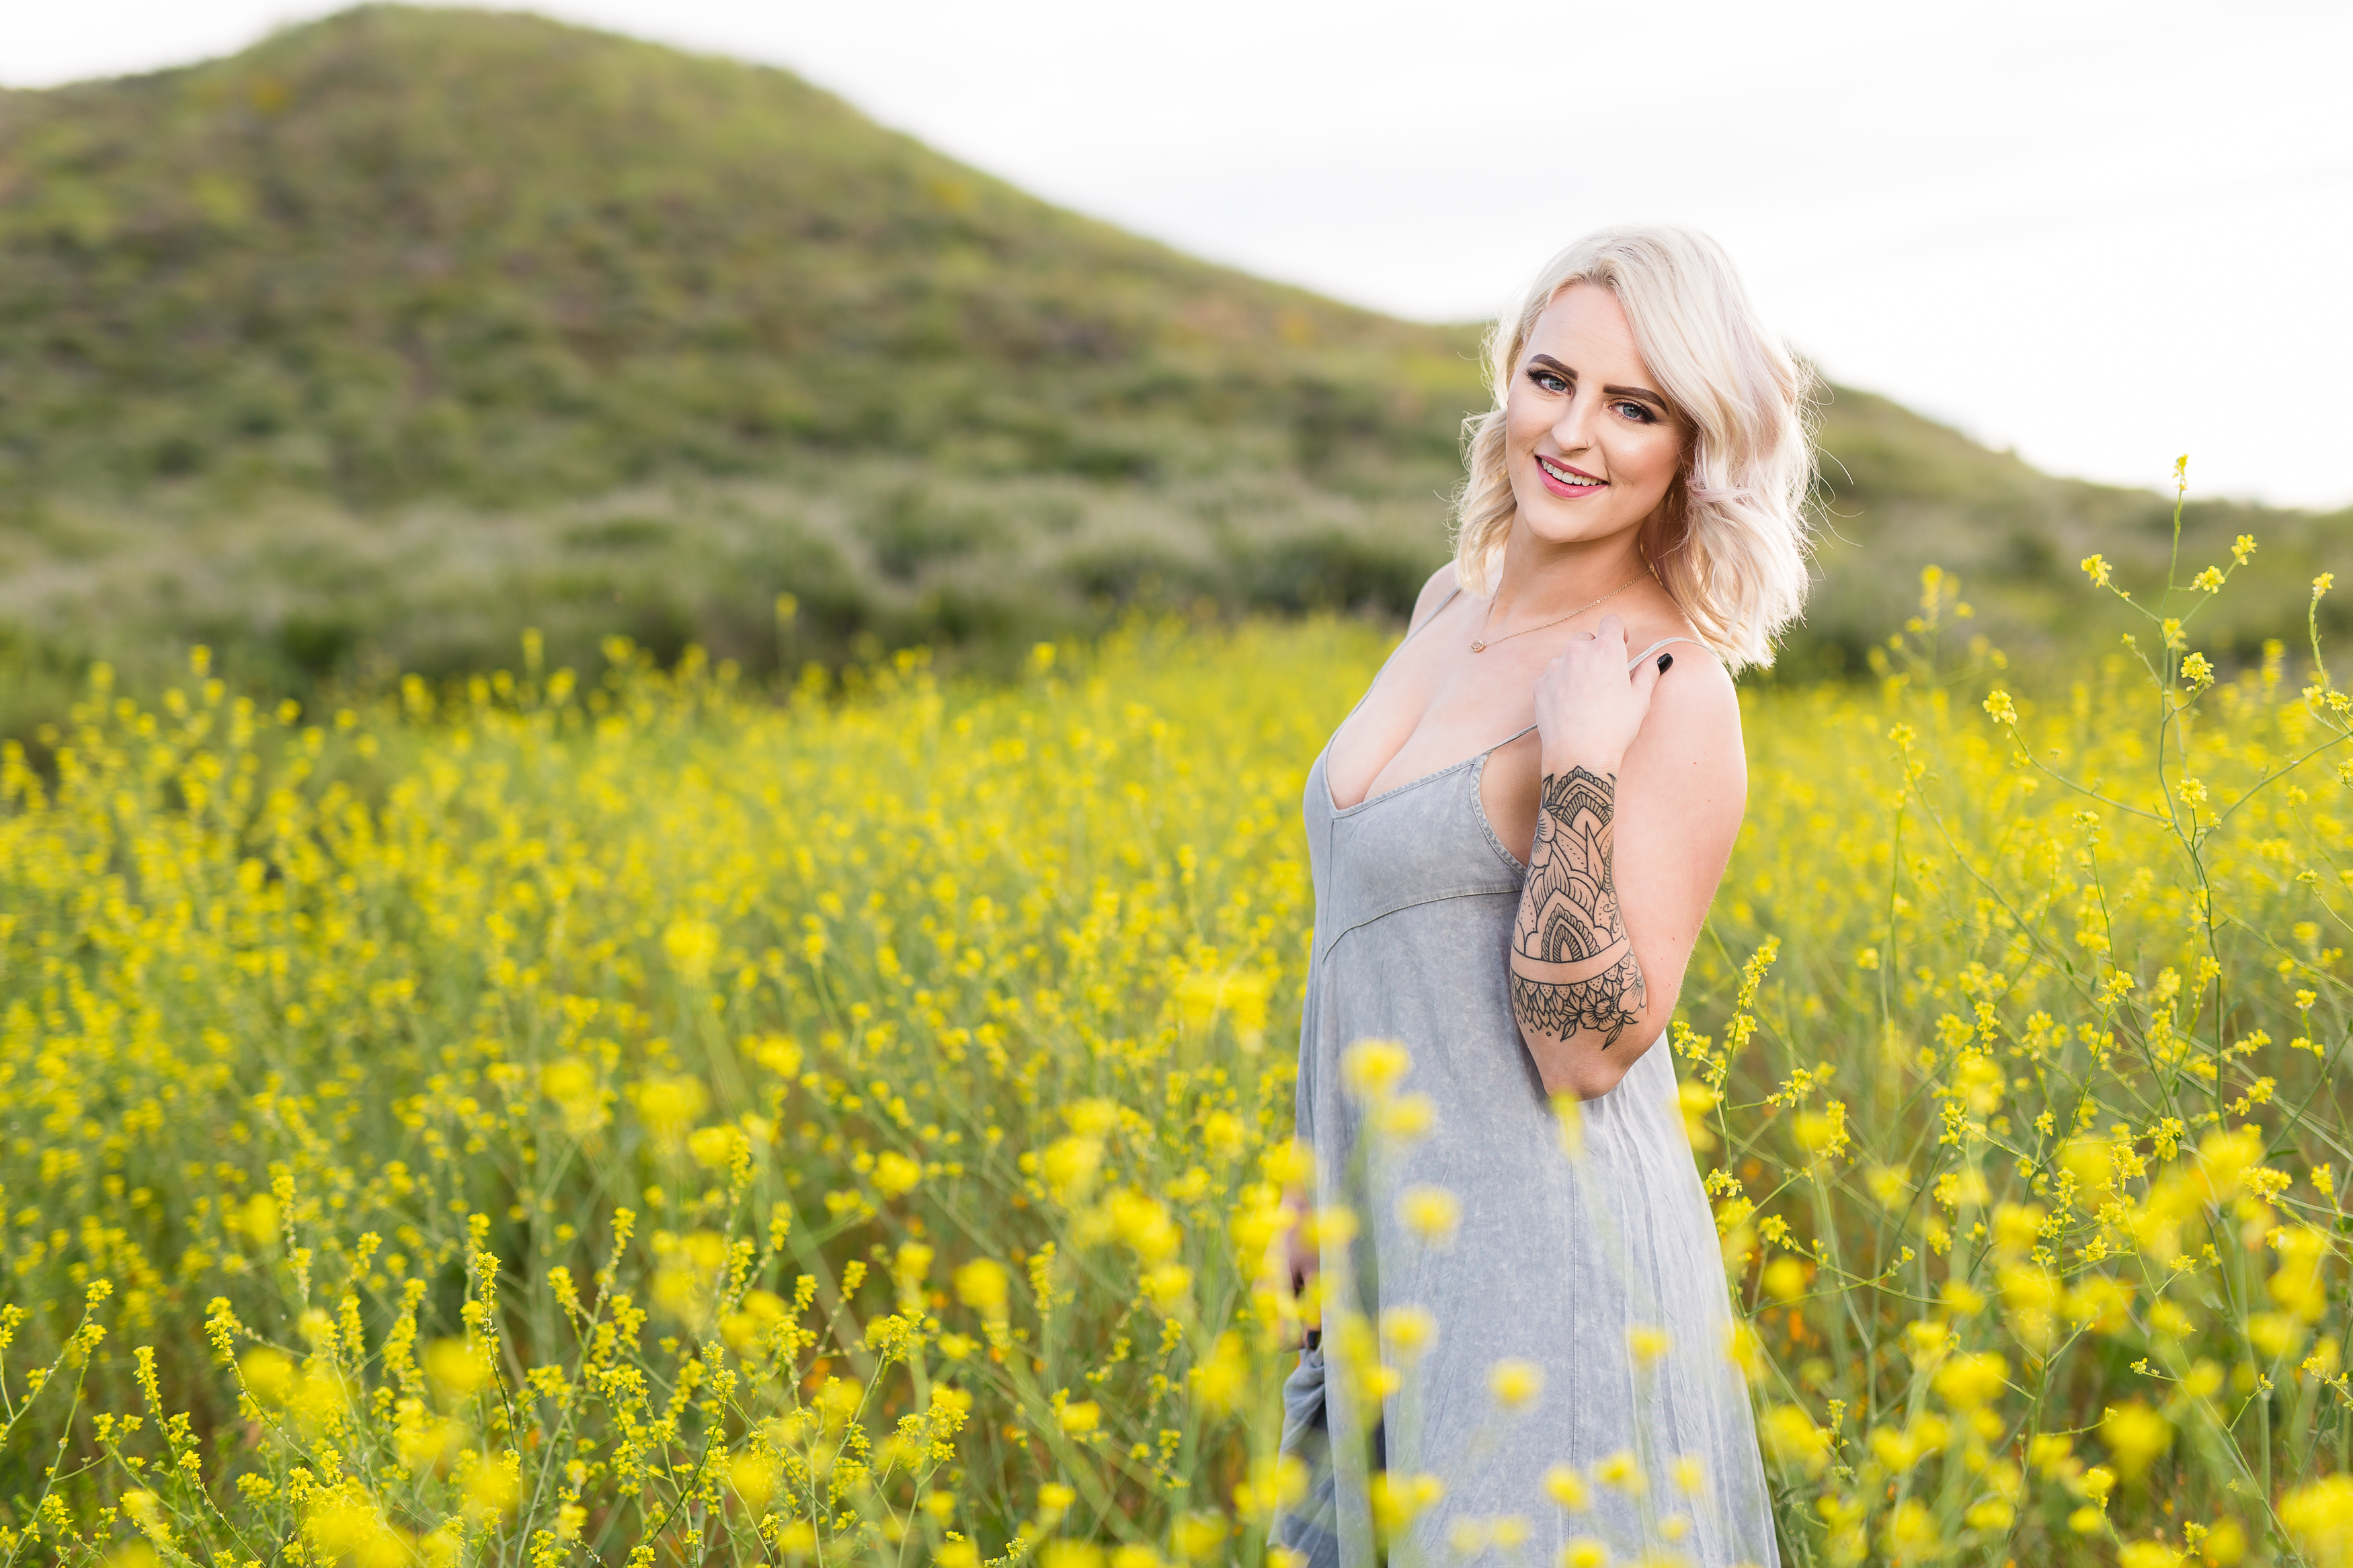 Woman with sultry smile standing in field of yellow poppies